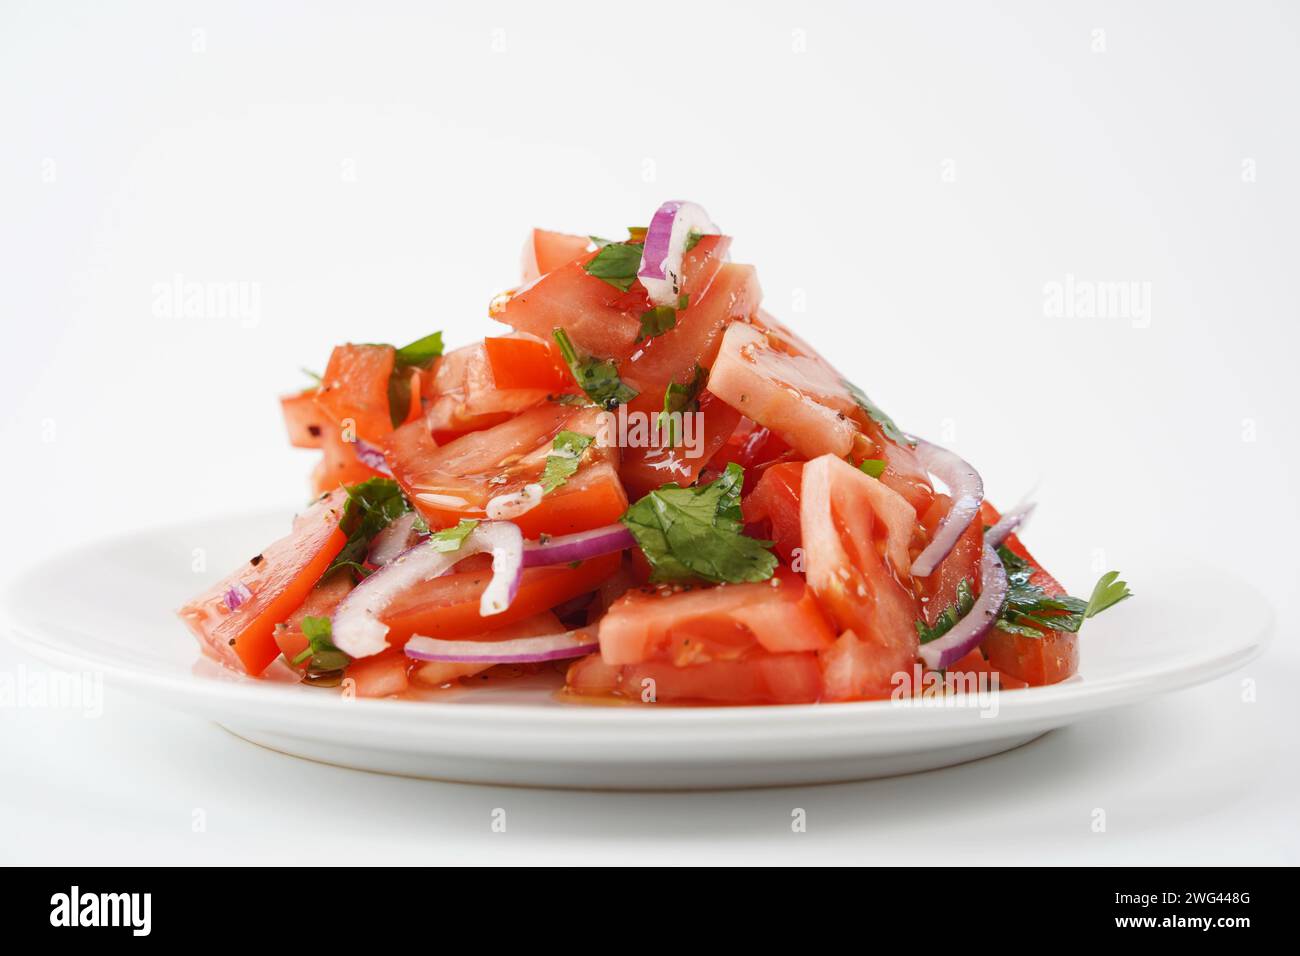 Salad with fresh tomatoes, olive oil, onions, parsley and fennel. Stock Photo